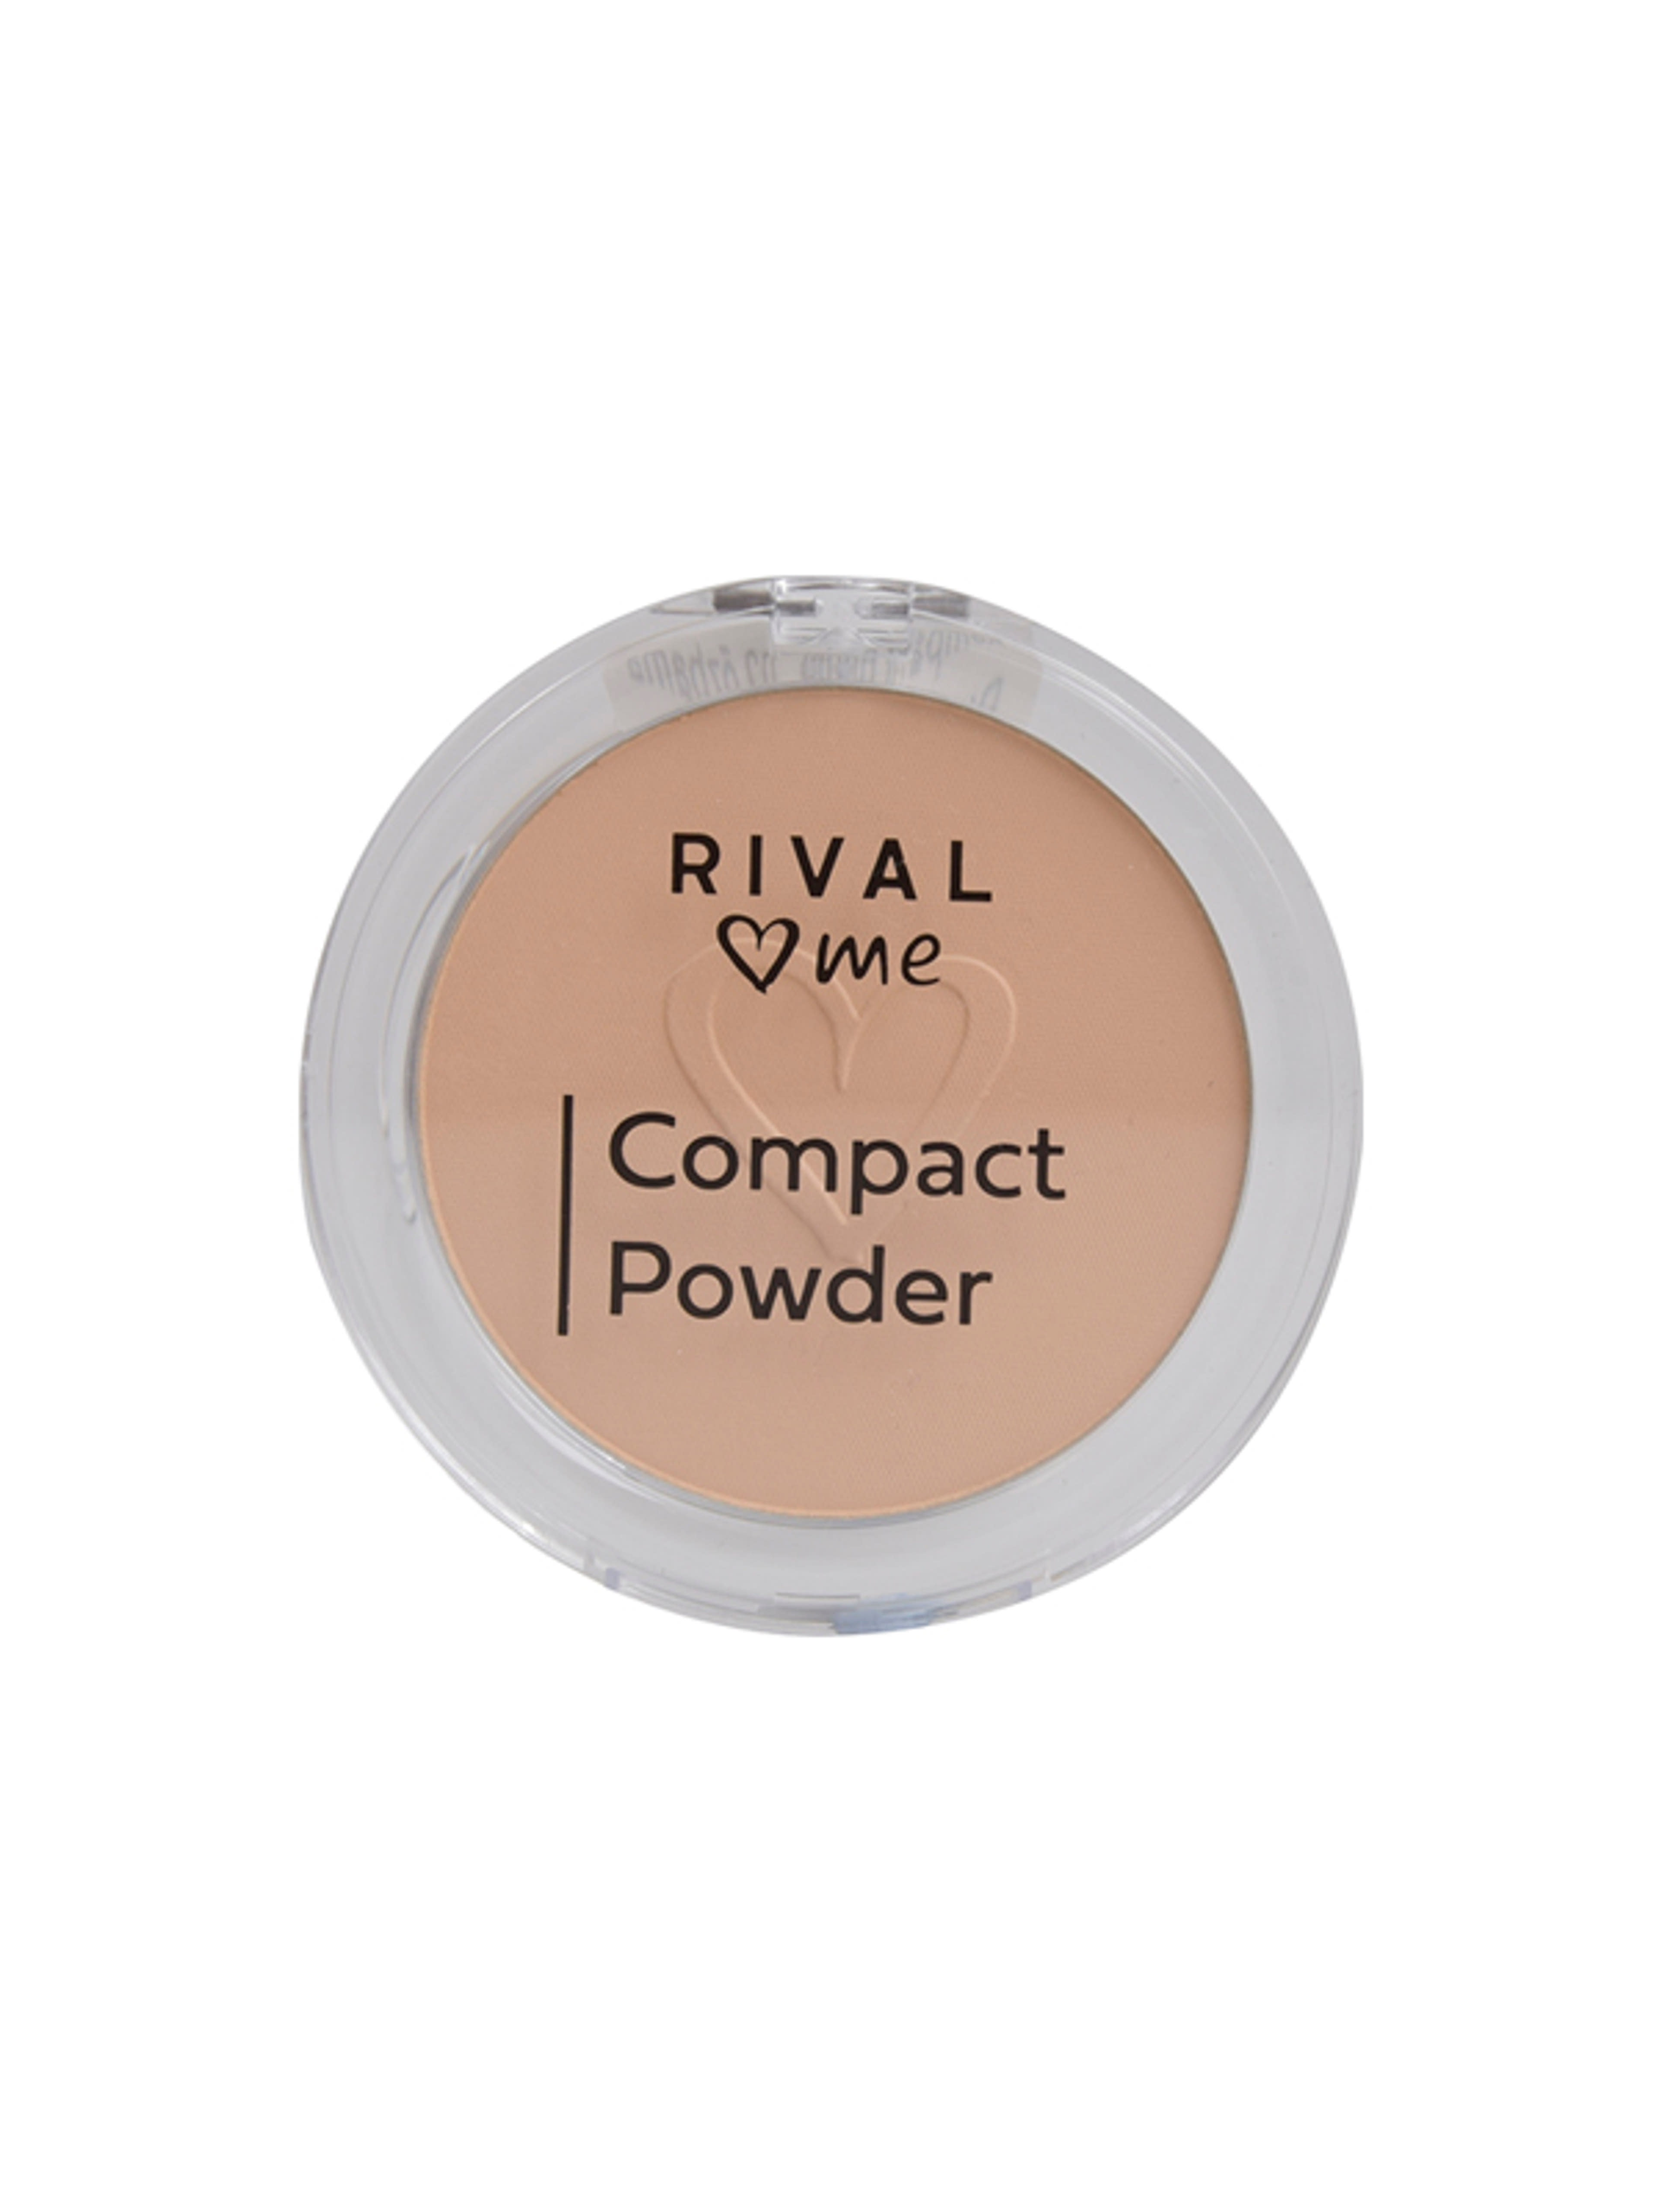 Rival Loves Me púder compact 02 fawn - 1 db-1